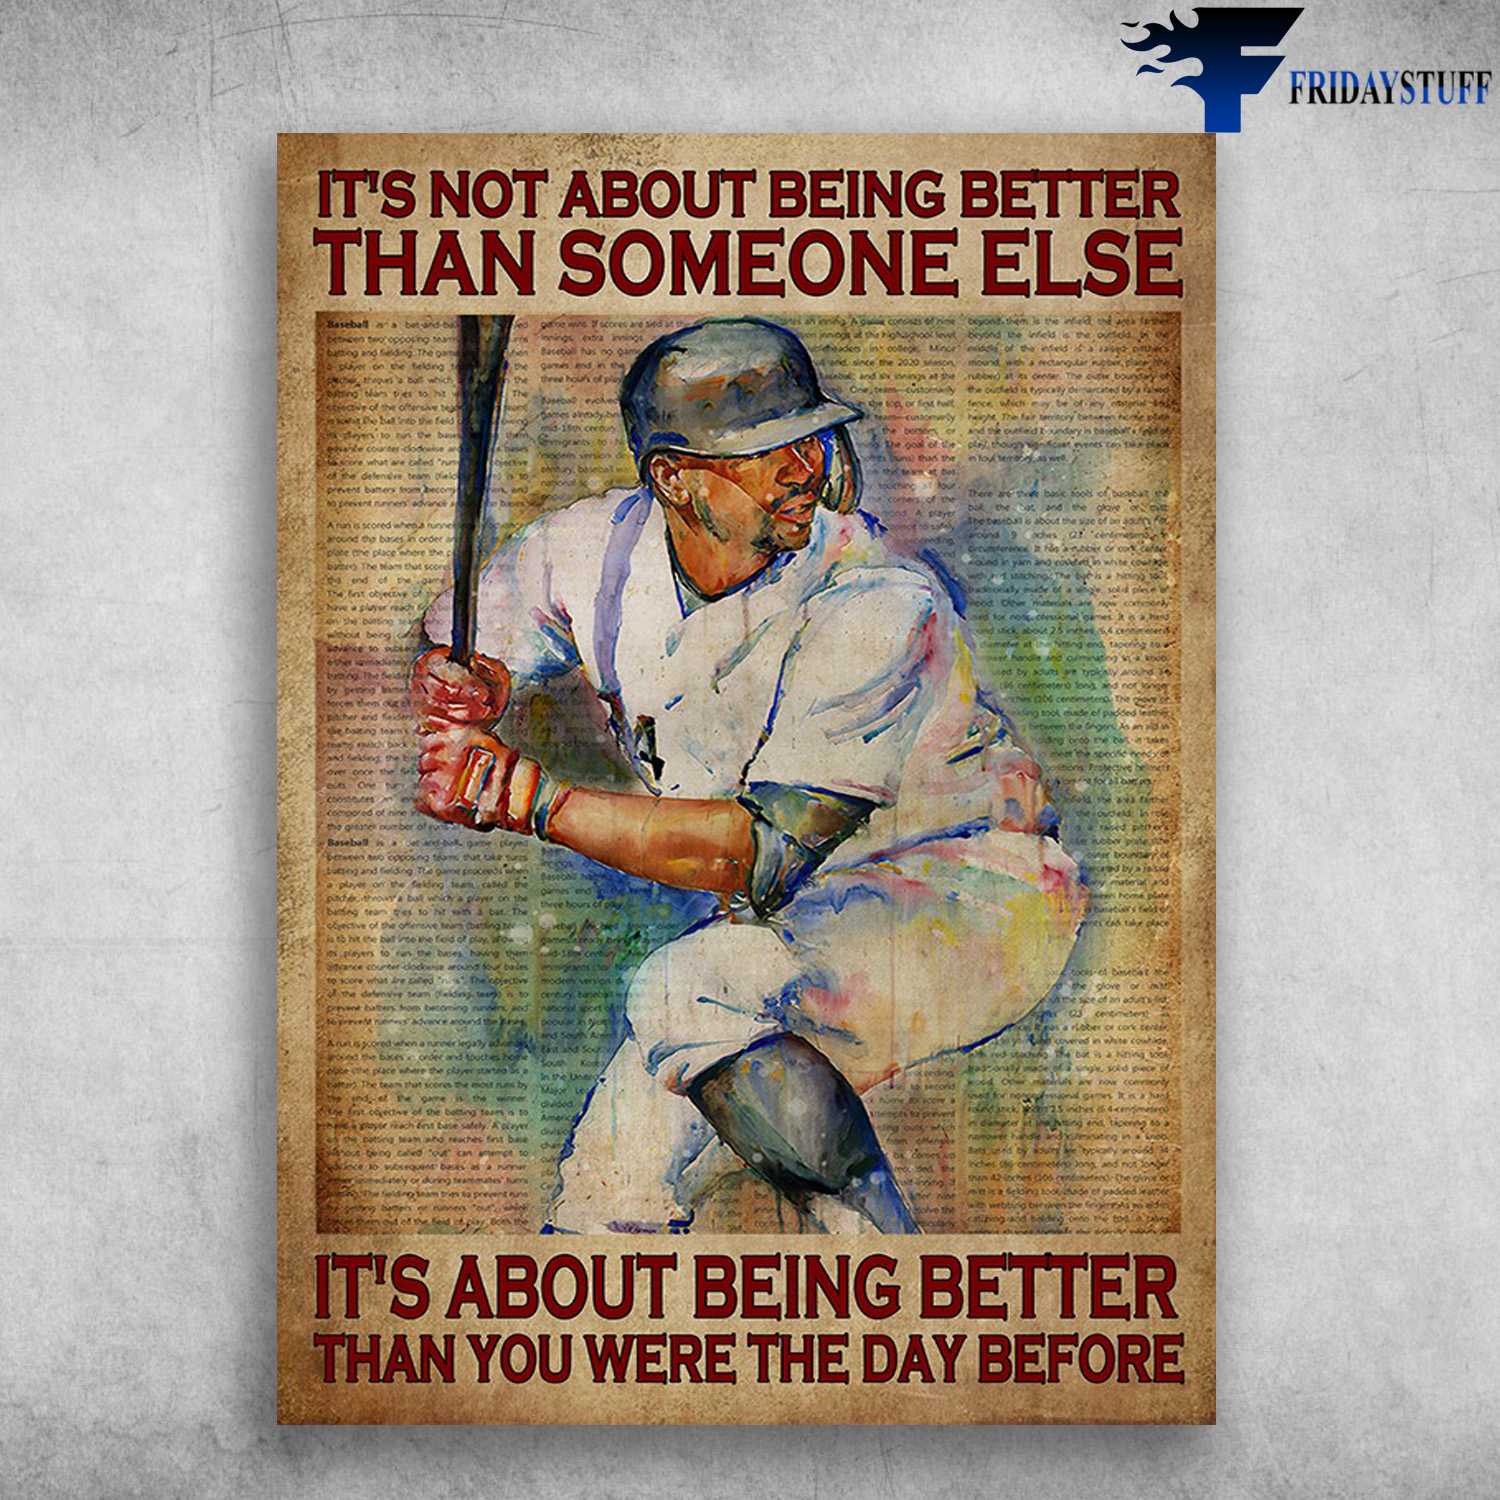 Baseball Player - It's Not About Being Better Than Someone Else, It's About Being Better Than You Were The Day Before